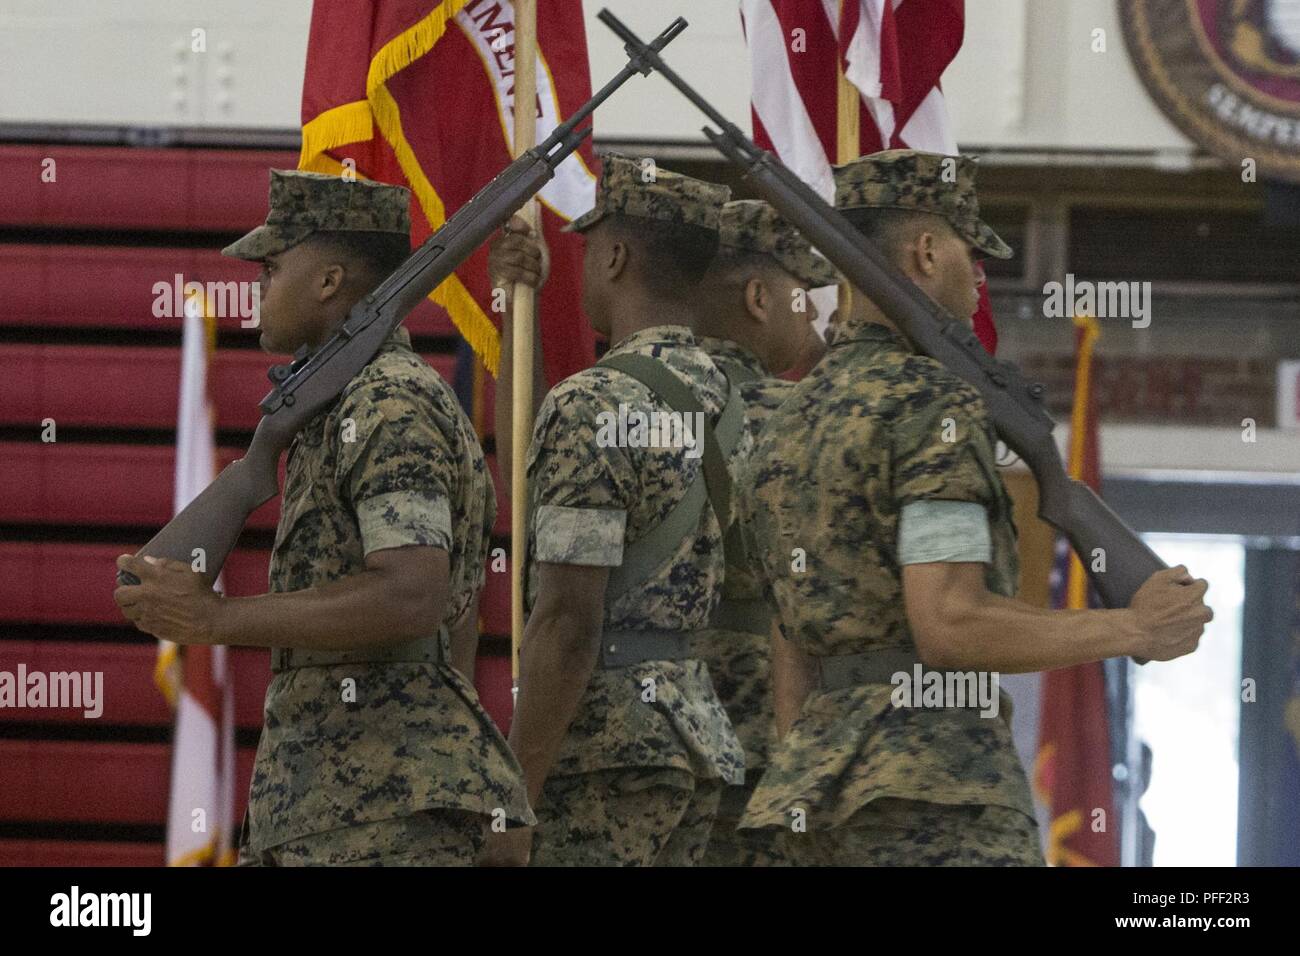 U.S. Marines with 6th Marine Regiment, 2nd Marine Division, march the colors during a change of command ceremony at Camp Lejeune, N.C., June 12, 2018. During the ceremony, Col. Matthew S. Reid relinquished command of 6th Marine Regiment to Col. Daniel T. Canfield Jr. Stock Photo